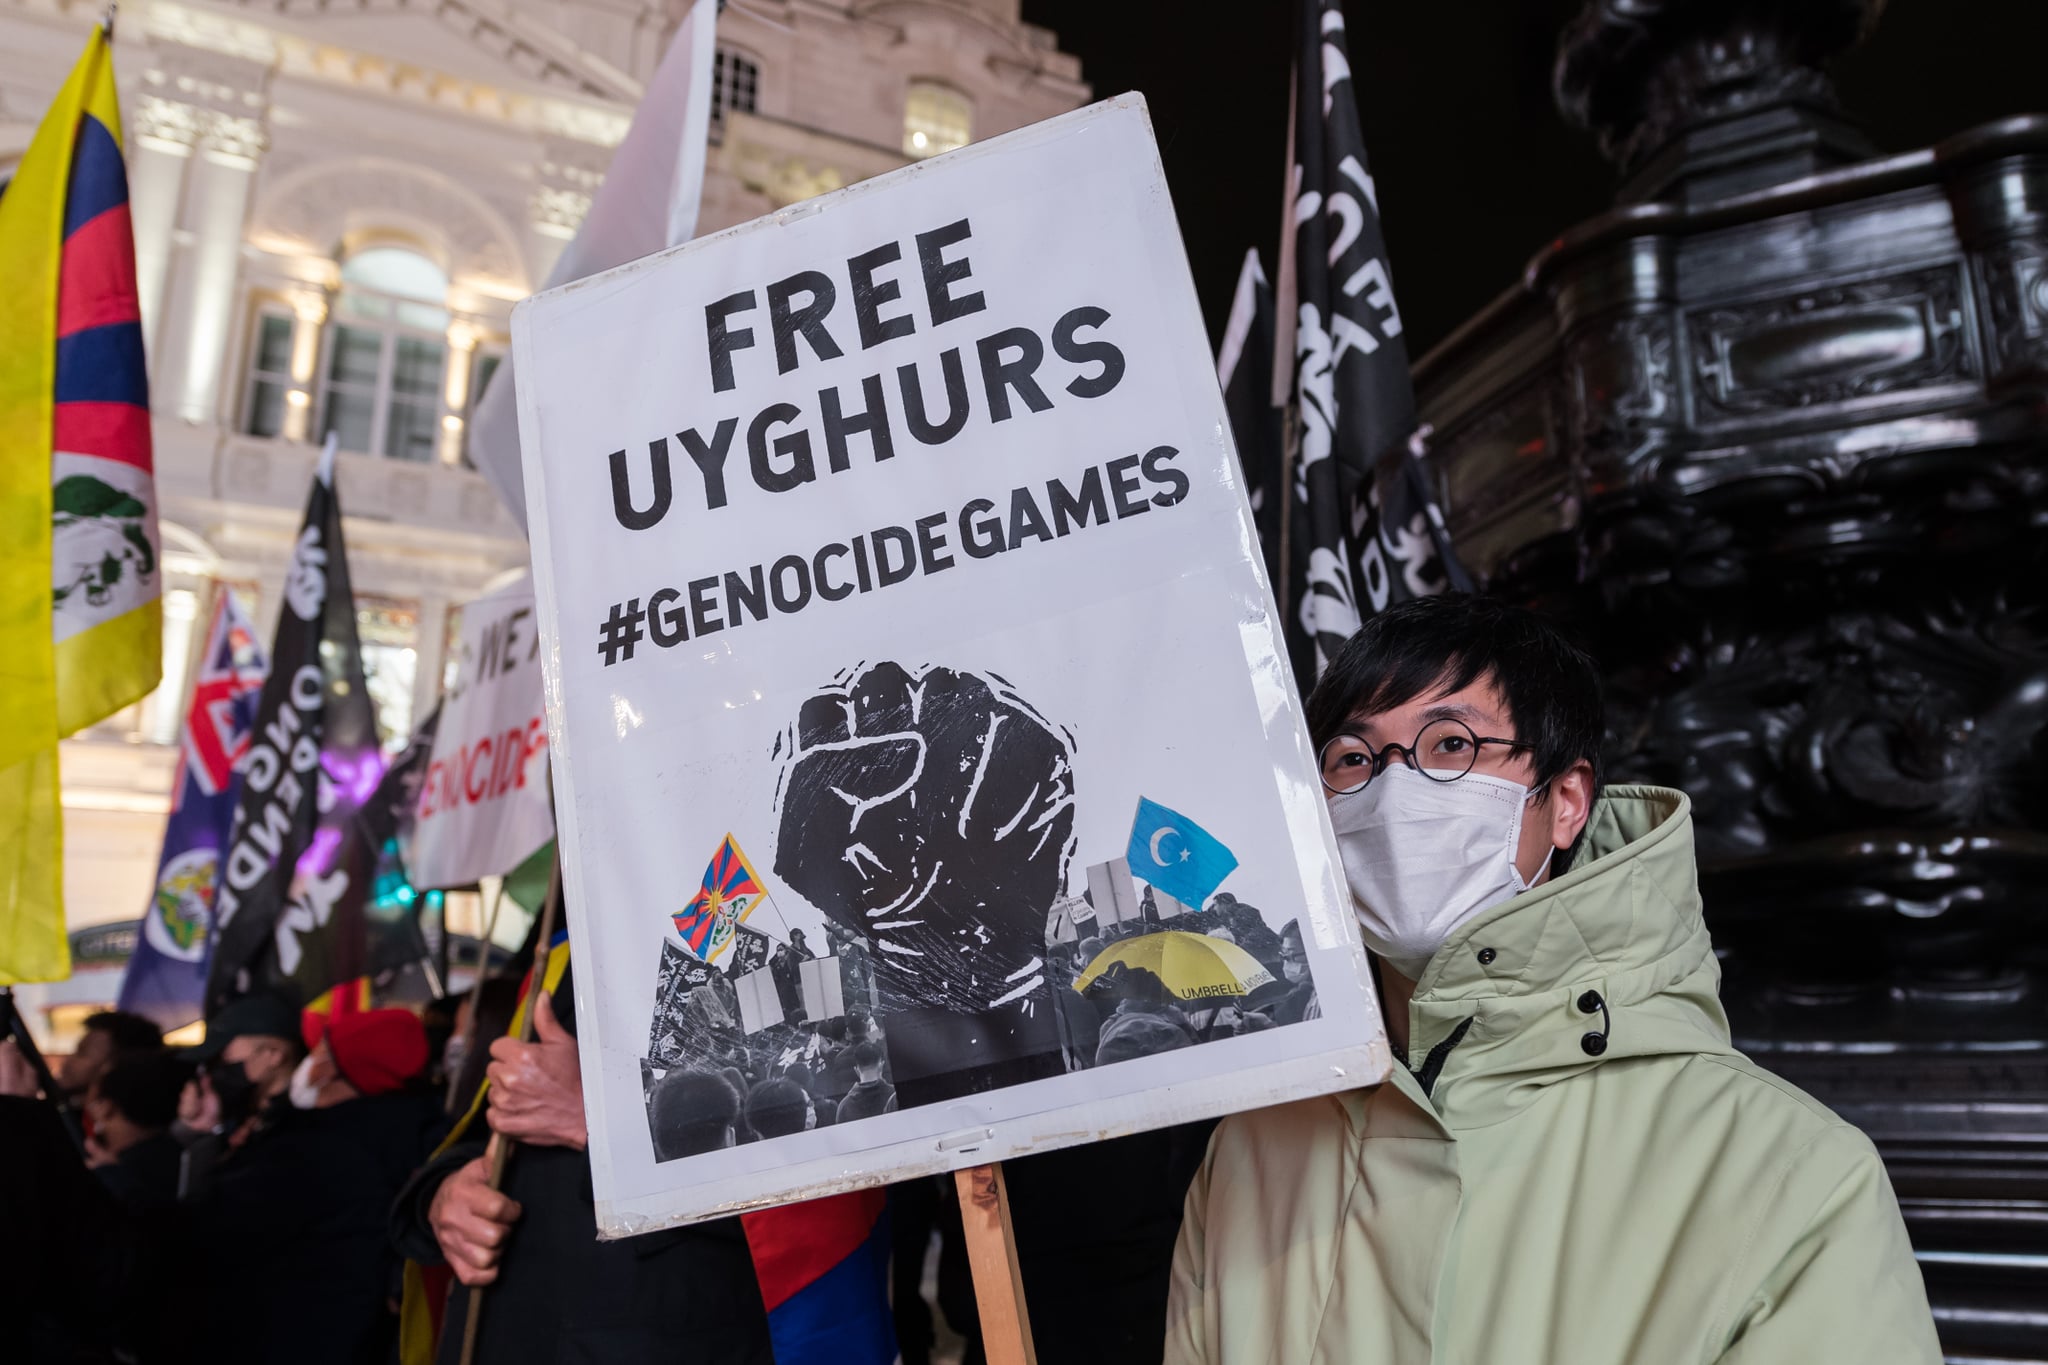 LONDON, UNITED KINGDOM - FEBRUARY 03, 2022: A demonstrator holds a placard as Hongkongers, Tibetans, Uyghur Muslims, their Tigrayan allies and supporters protest in Piccadilly Circus on the eve of Beijing 2022 Winter Olympic Games on February 03, 2022 in London, England. The demonstrators protest against the International Olympics Committee's (IOC) decision to award this year's Winter Olympics to China amid the country's record of human rights violations in Hongkong and Tibet as well as crimes against humanity against Uyghurs and other Turkic Muslims in the northwestern region of Xinjiang. (Photo credit should read Wiktor Szymanowicz/Future Publishing via Getty Images)